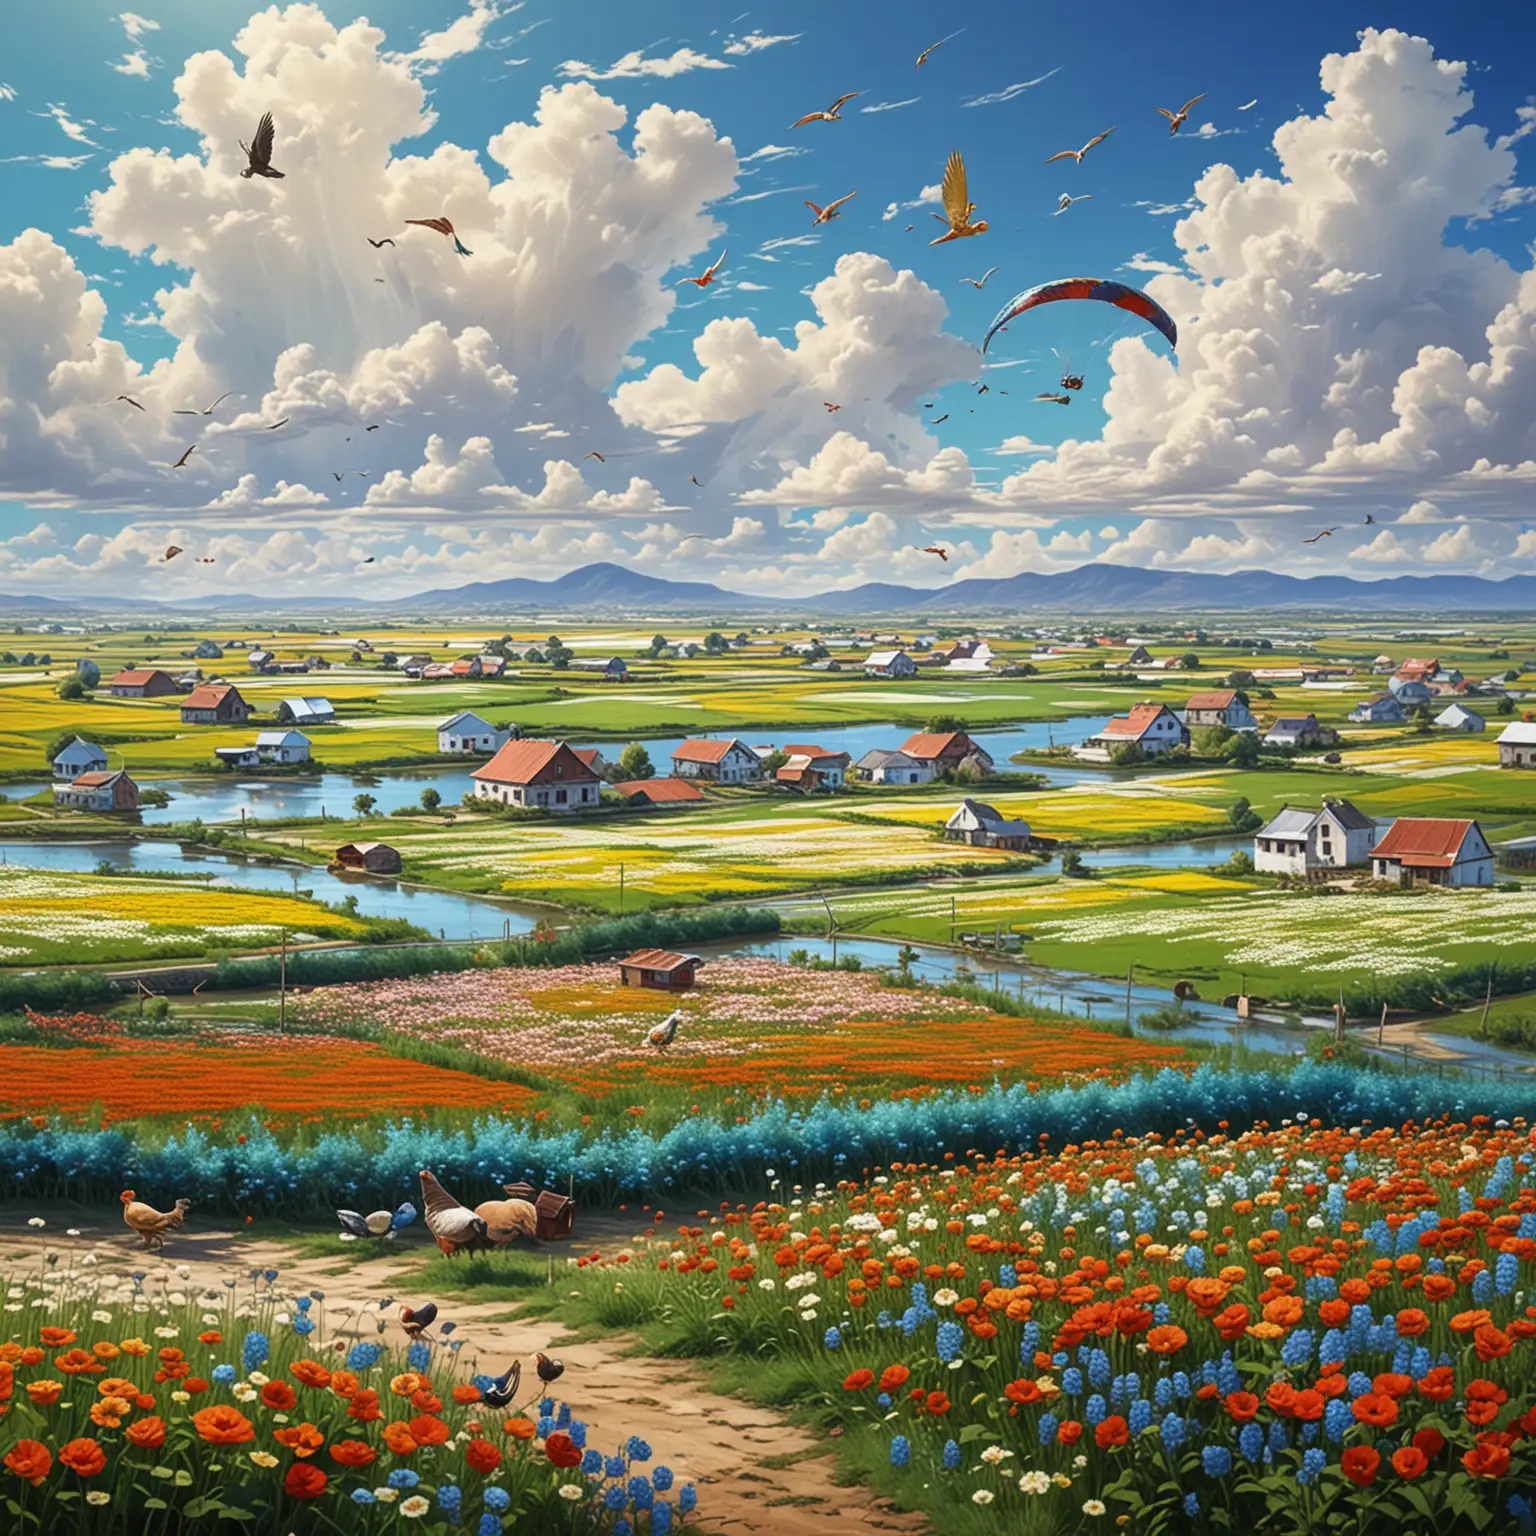 Picturesque-Flower-Field-with-Homes-Poultry-and-Flying-Kites